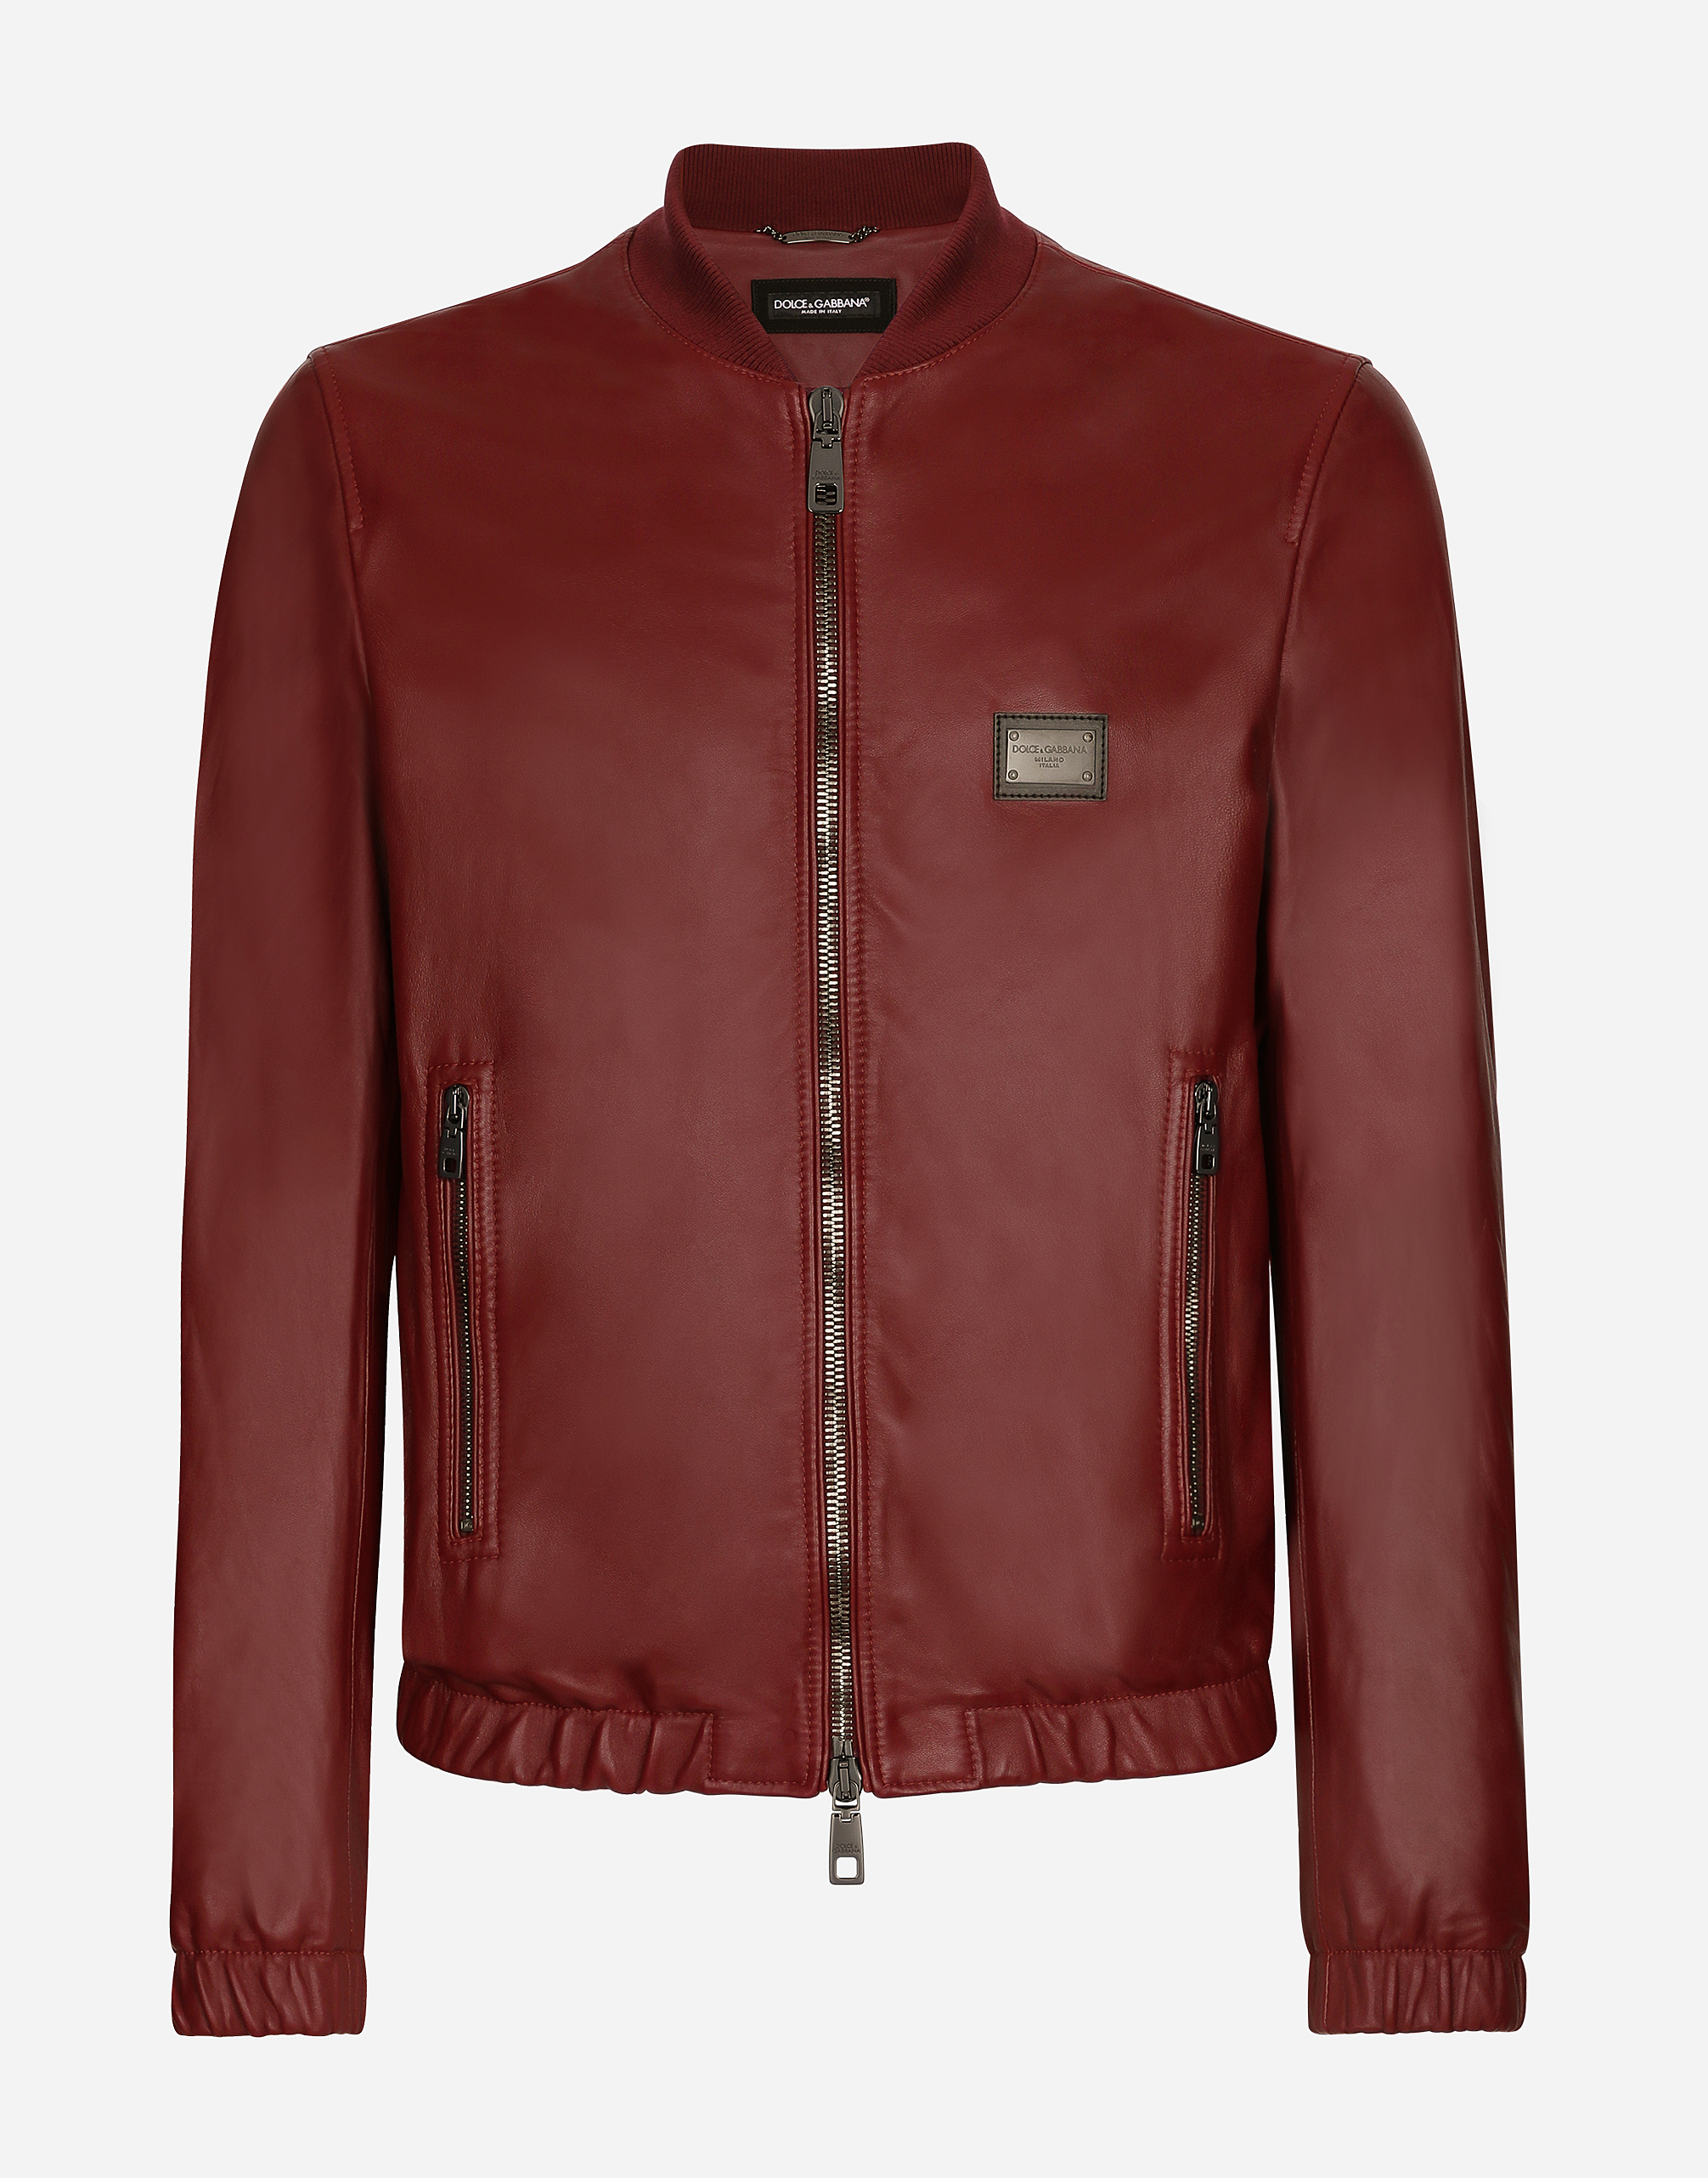 Leather jacket with branded tag in Bordeaux